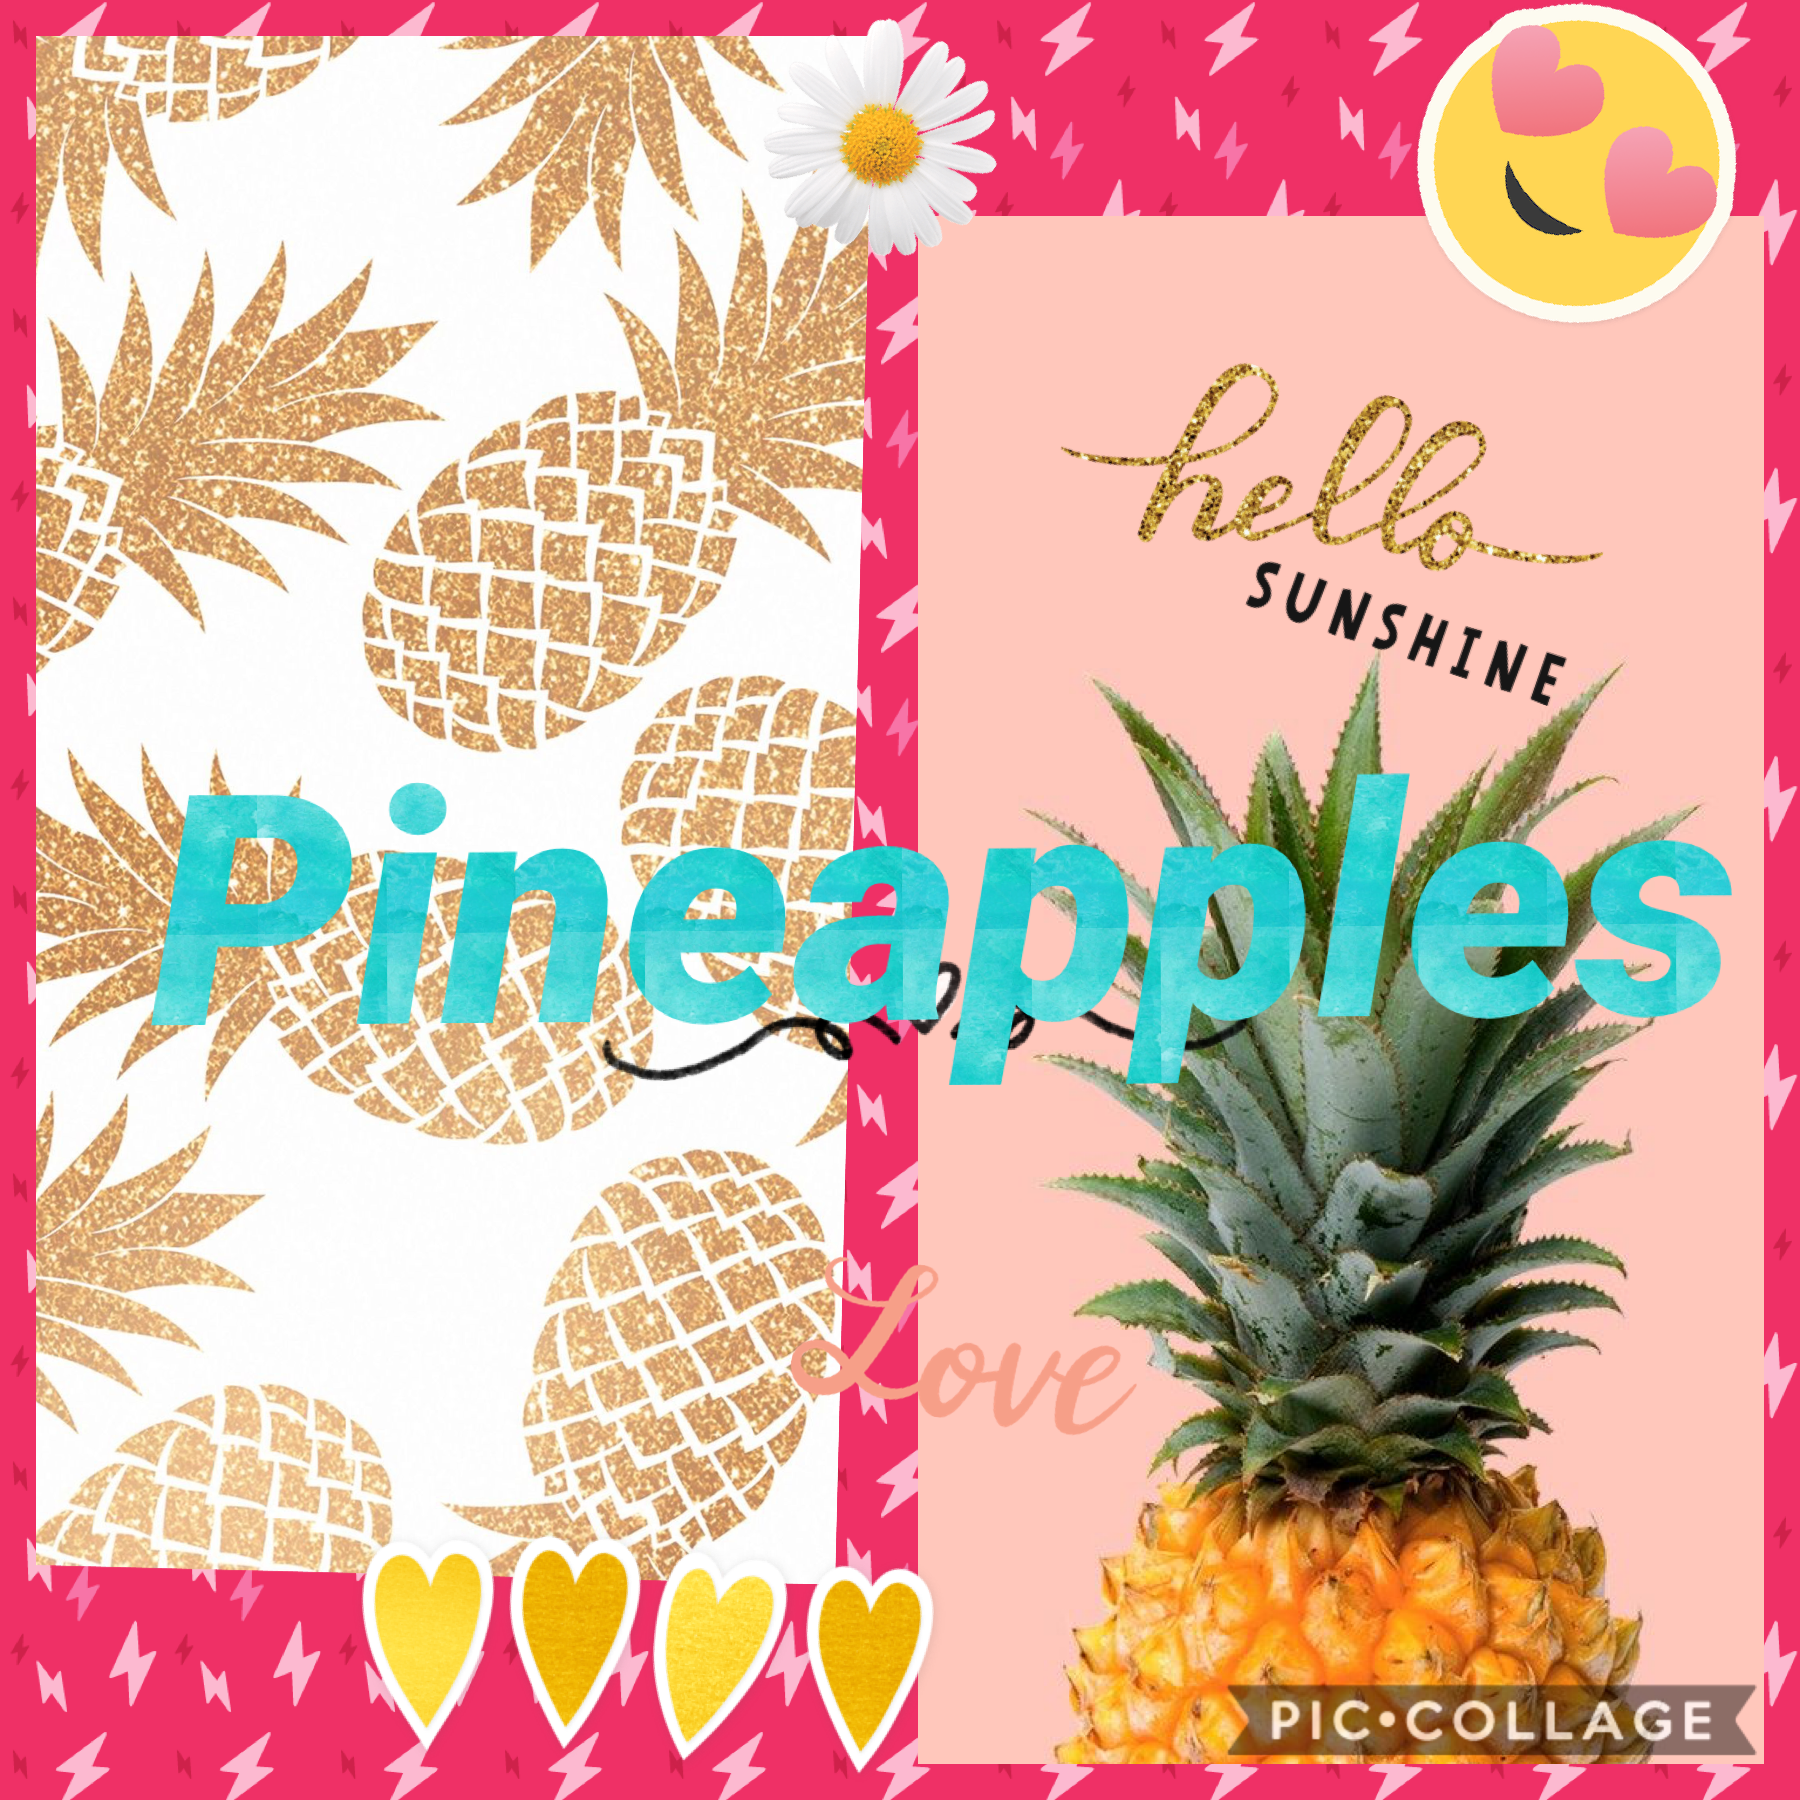 ❤️ 🍍
OMG pineapples are the best 